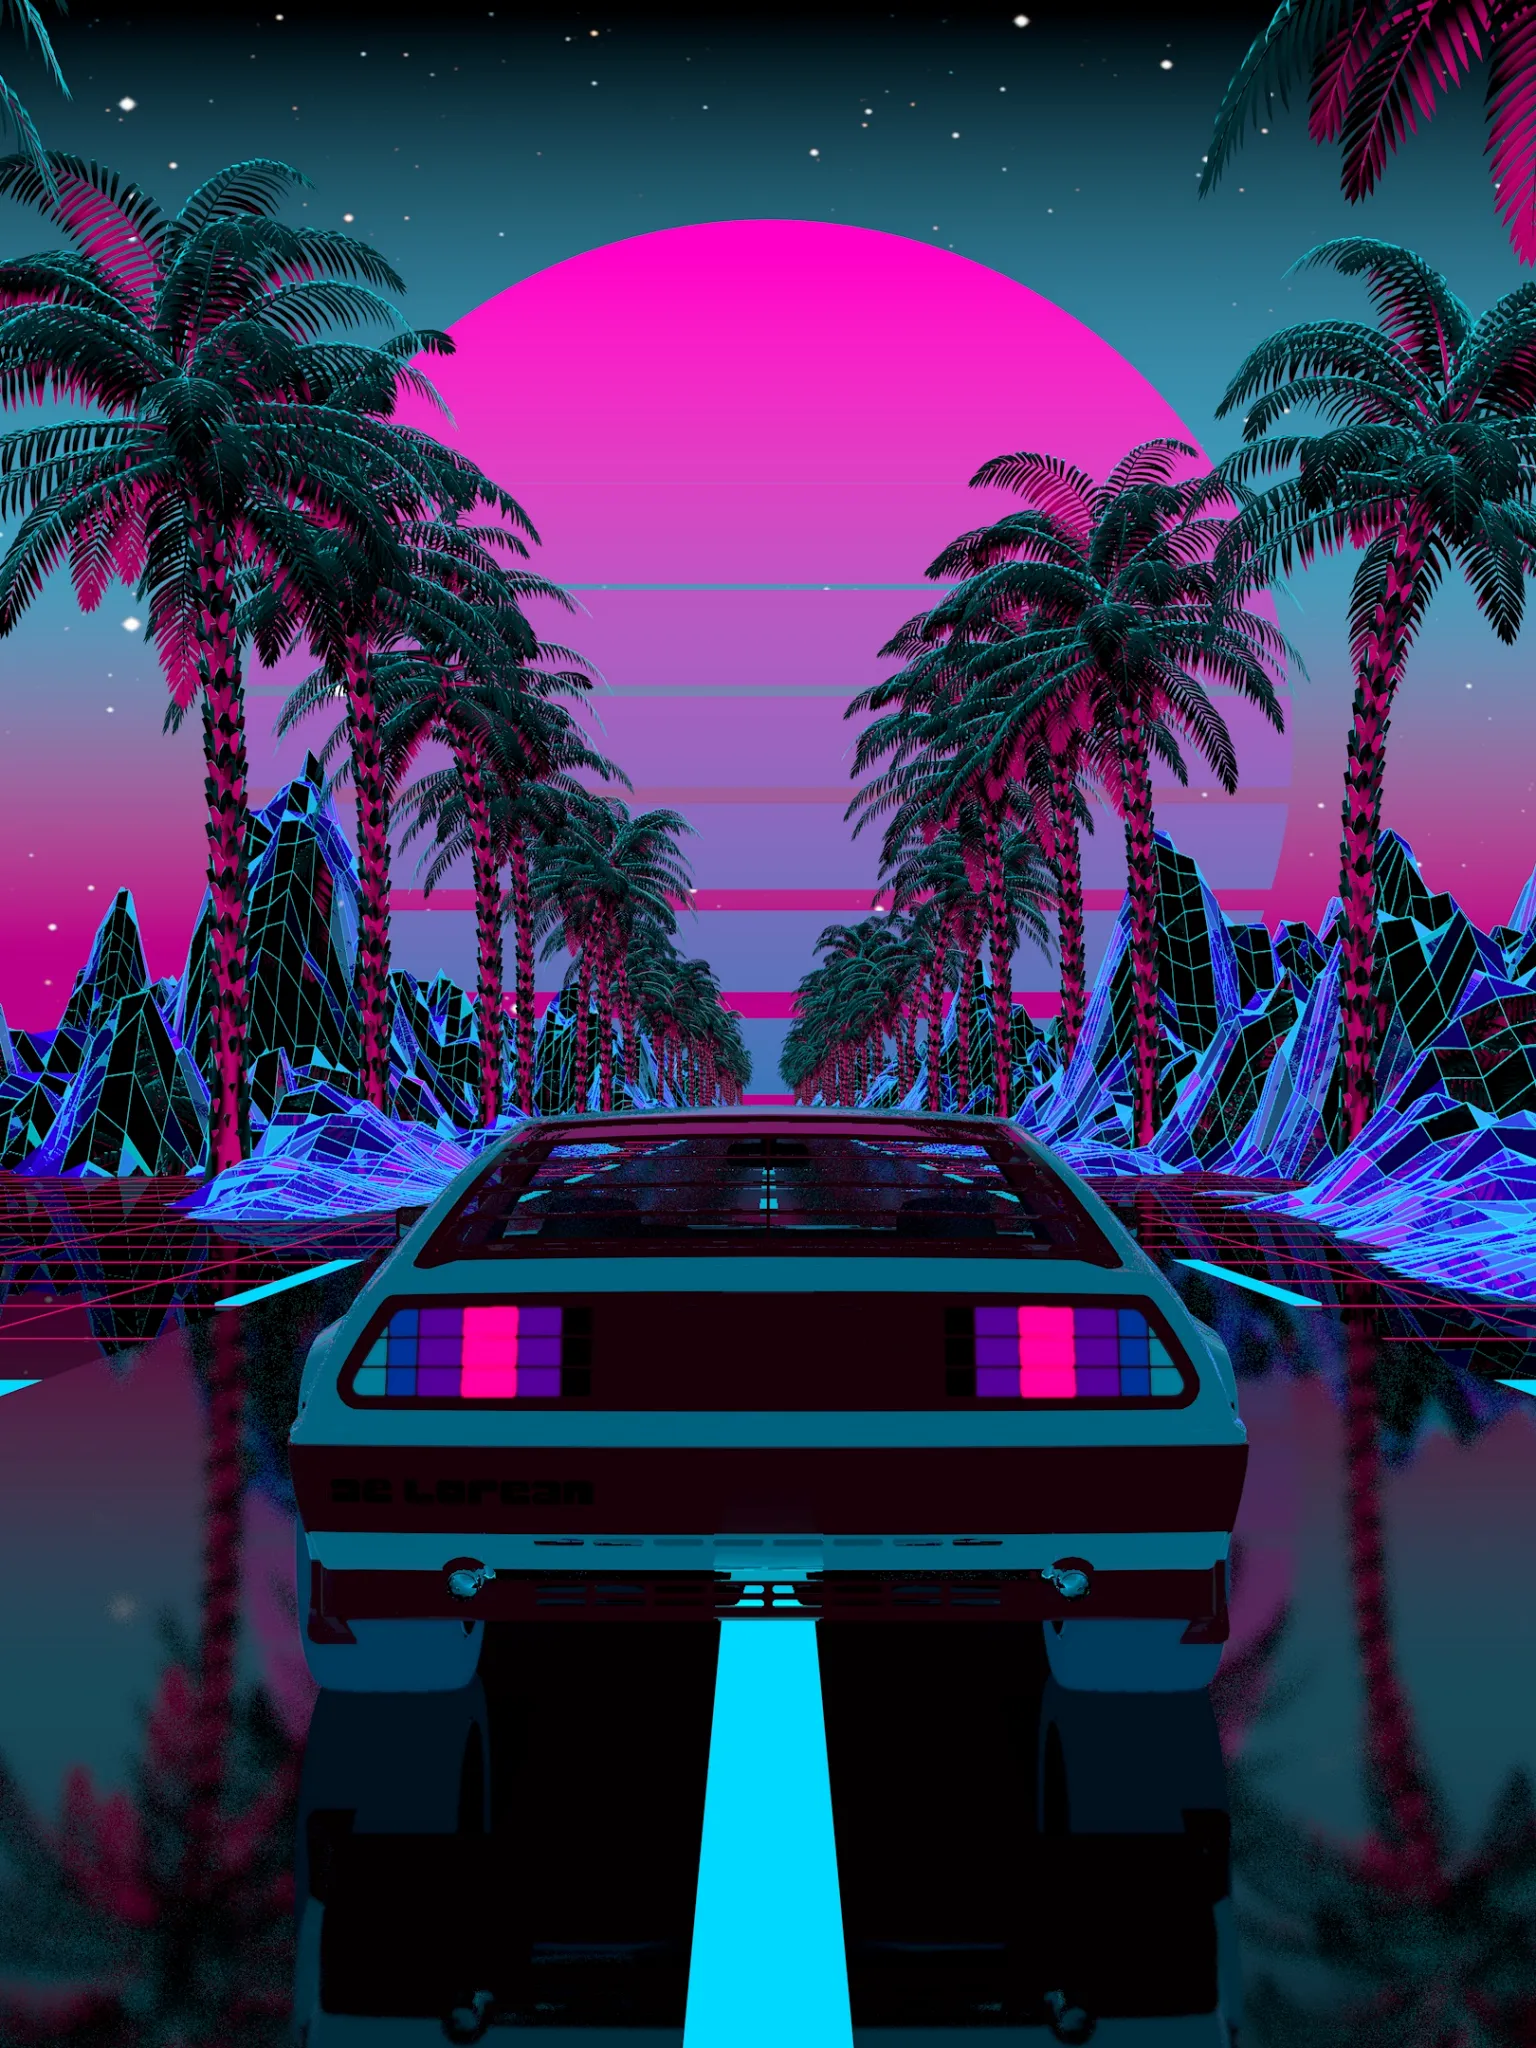 synth style background wallpaper